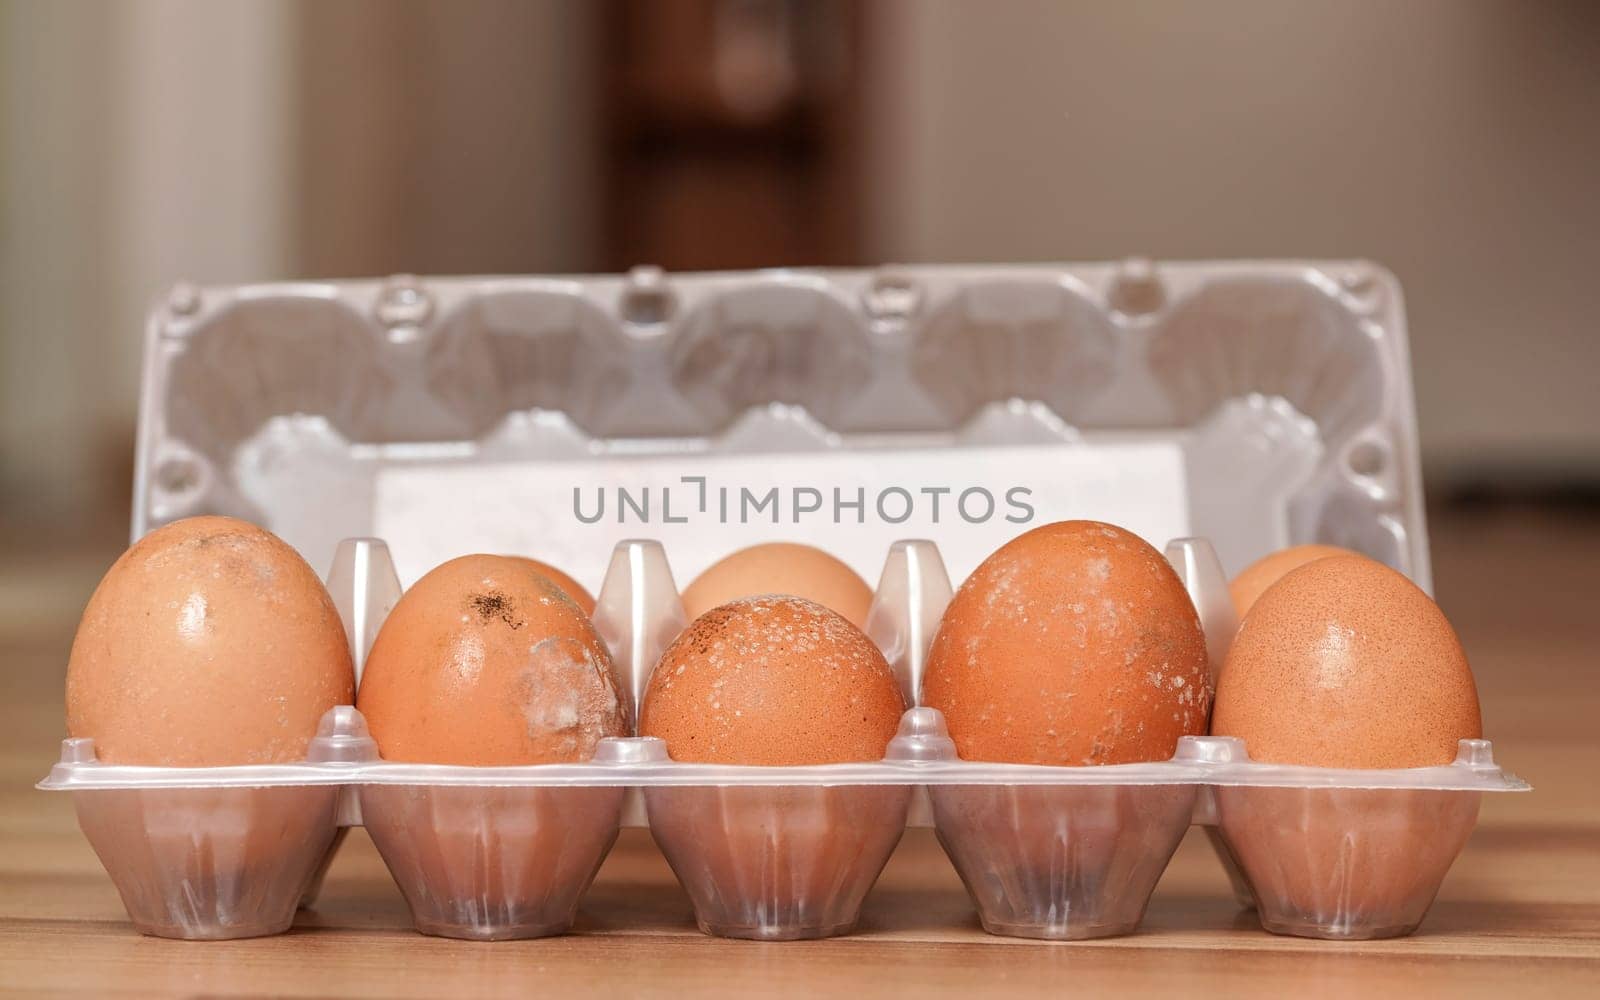 Ten mouldy eggs in plastic packaging, mildew growing on shell as they were stored improperly in wet fridge for long